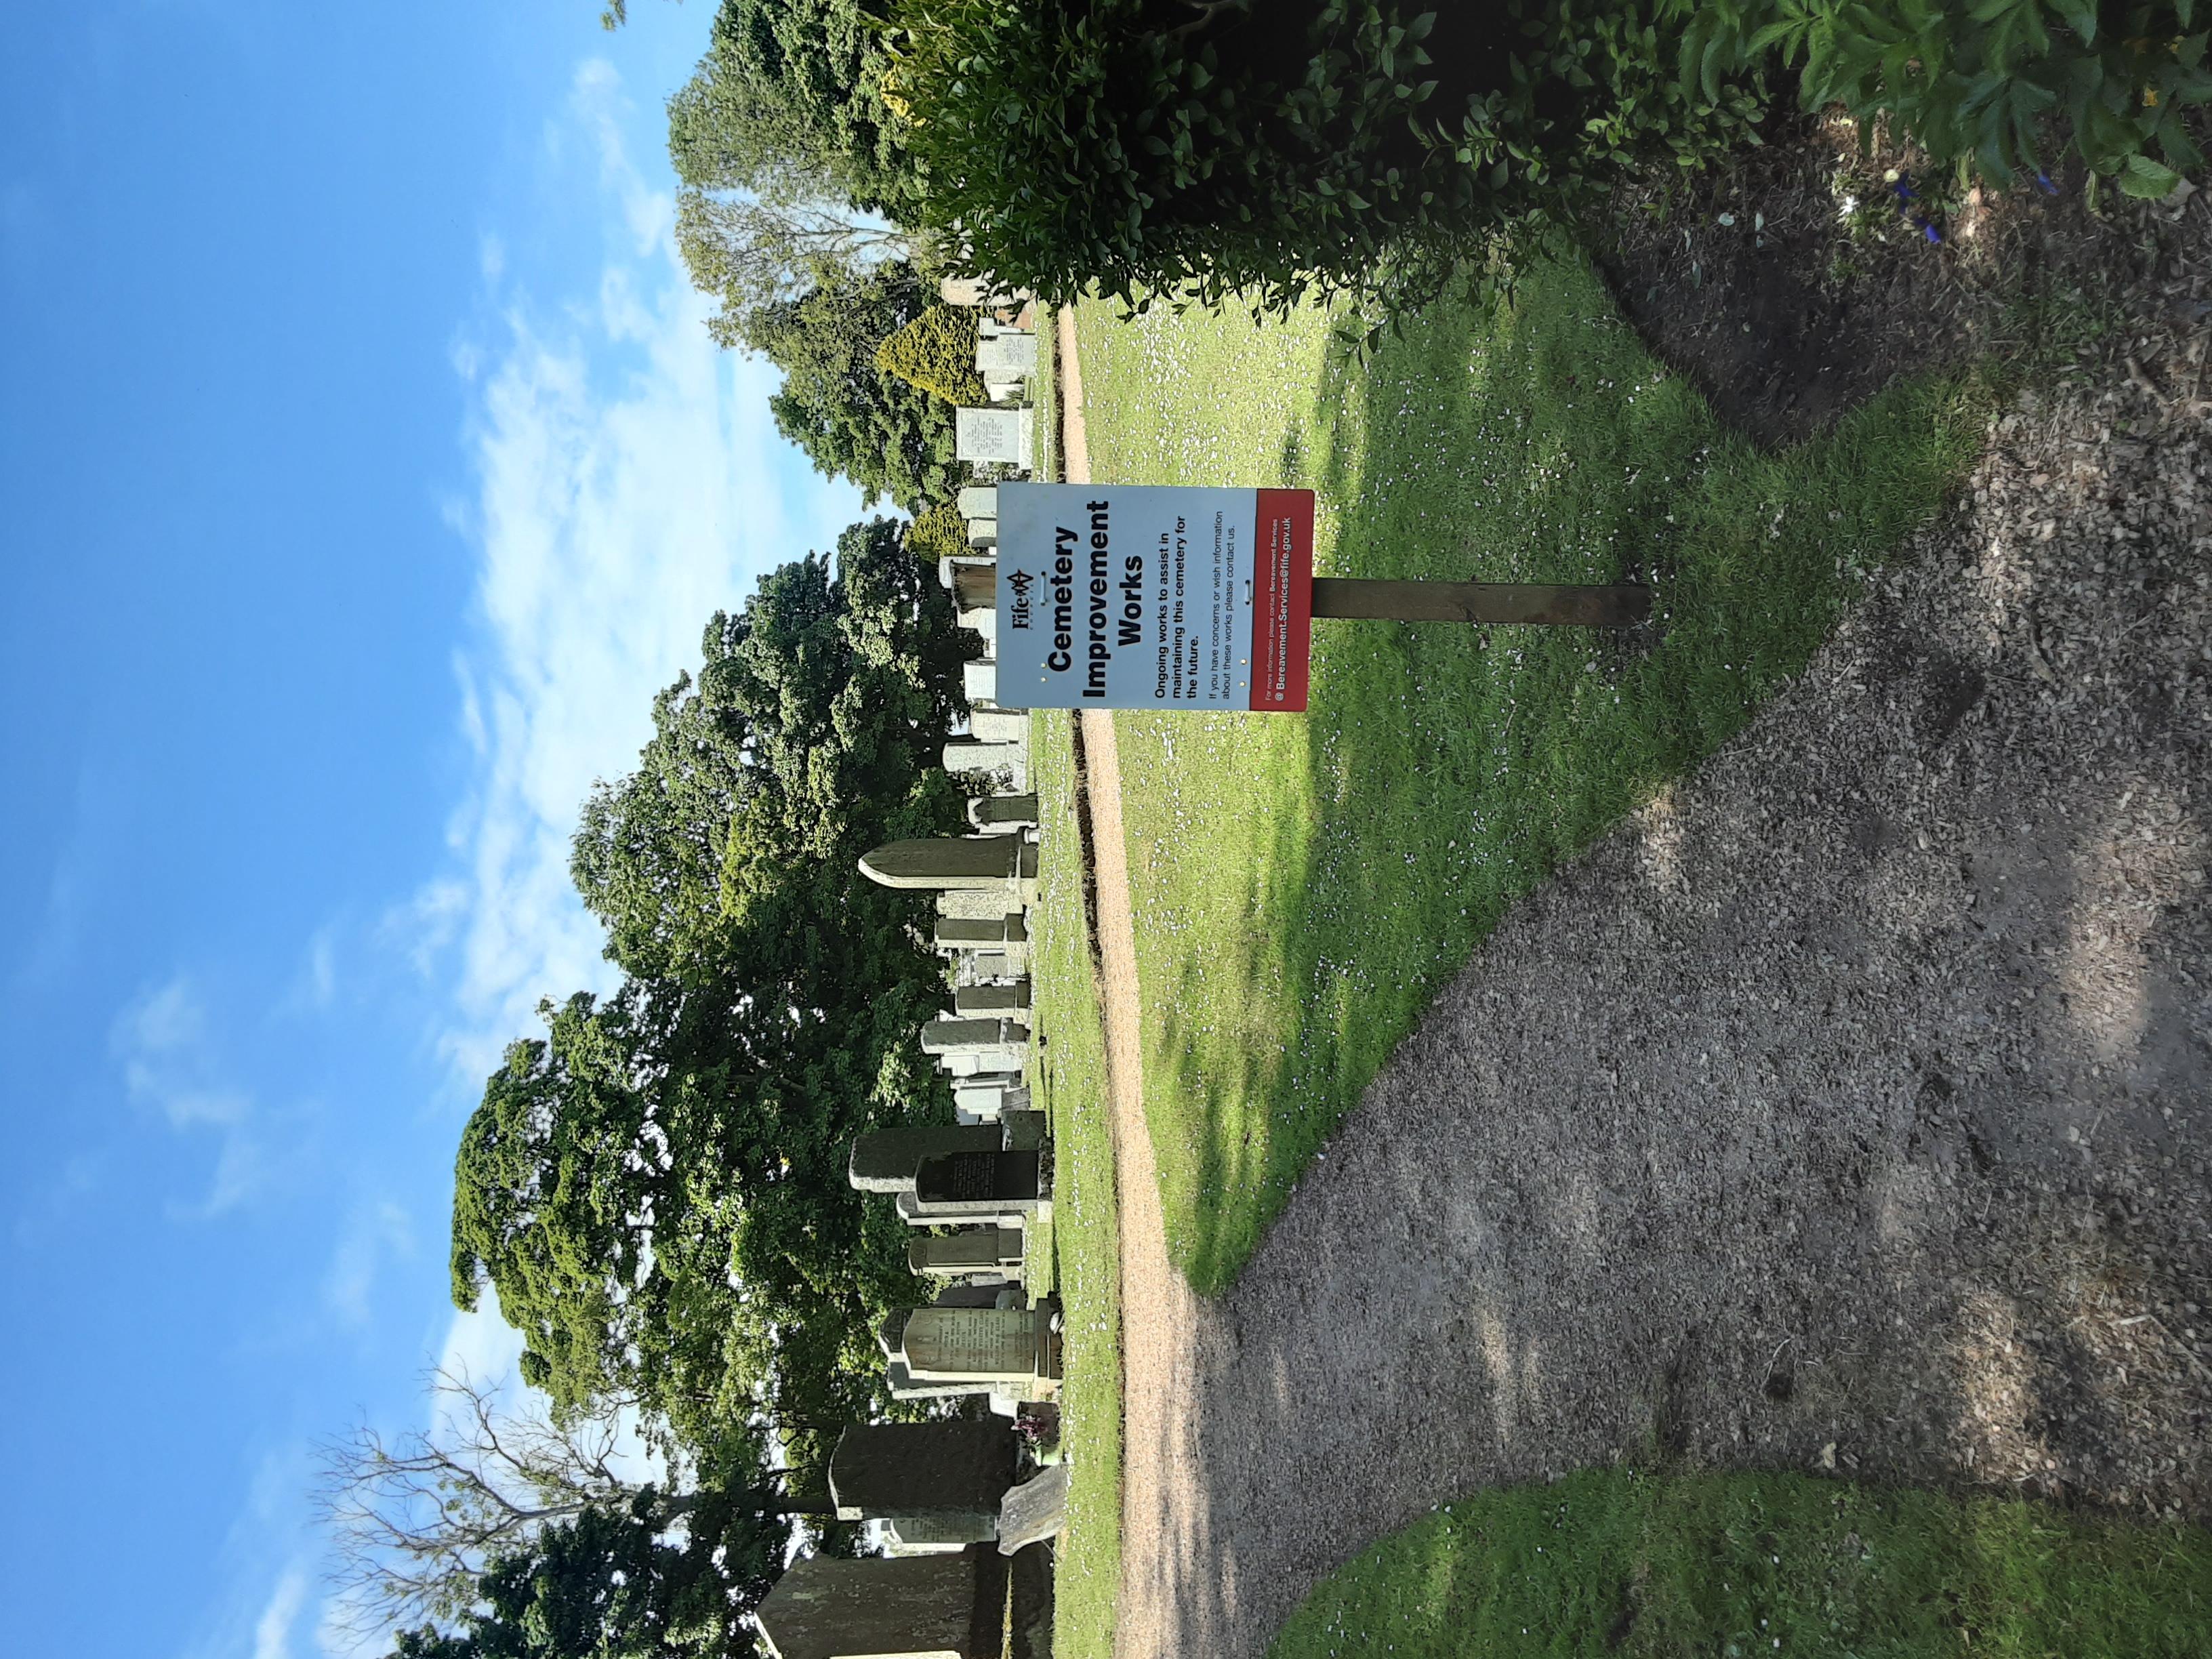 Entrance to Crail Cemetery on a sunny day with headstones visible in the background.   In the foreground there's a sign advising that headstone inspections are taking place .